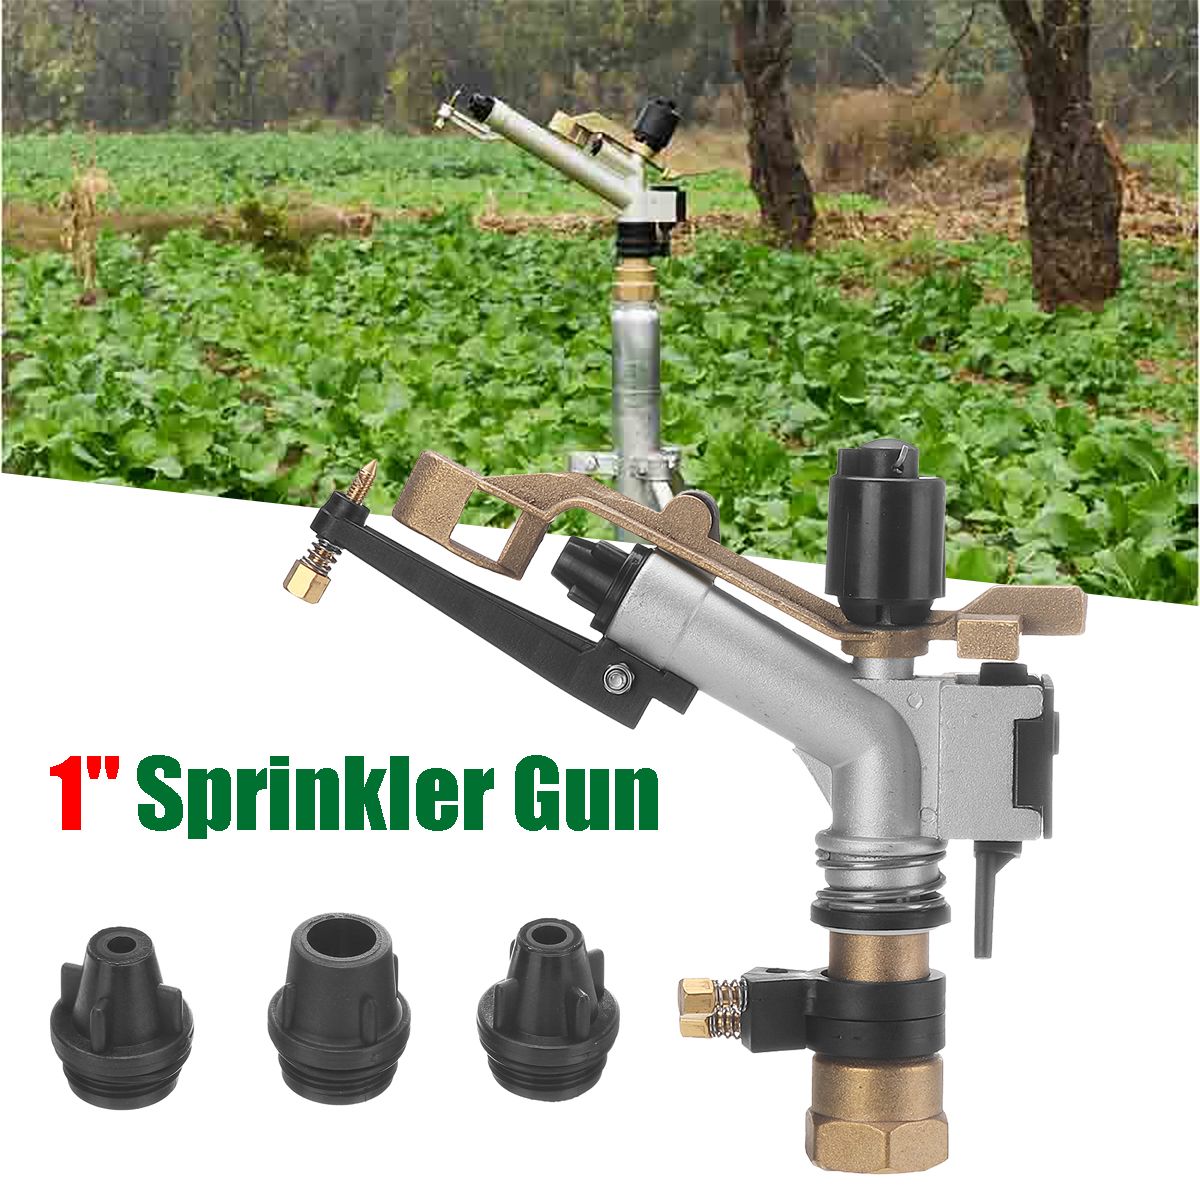 1quot-Female-Thread-Big-Covering-Range-Sprinkler-Garden-Agriculture-Lawn-Grass-Irrigation-Watering-N-1702370